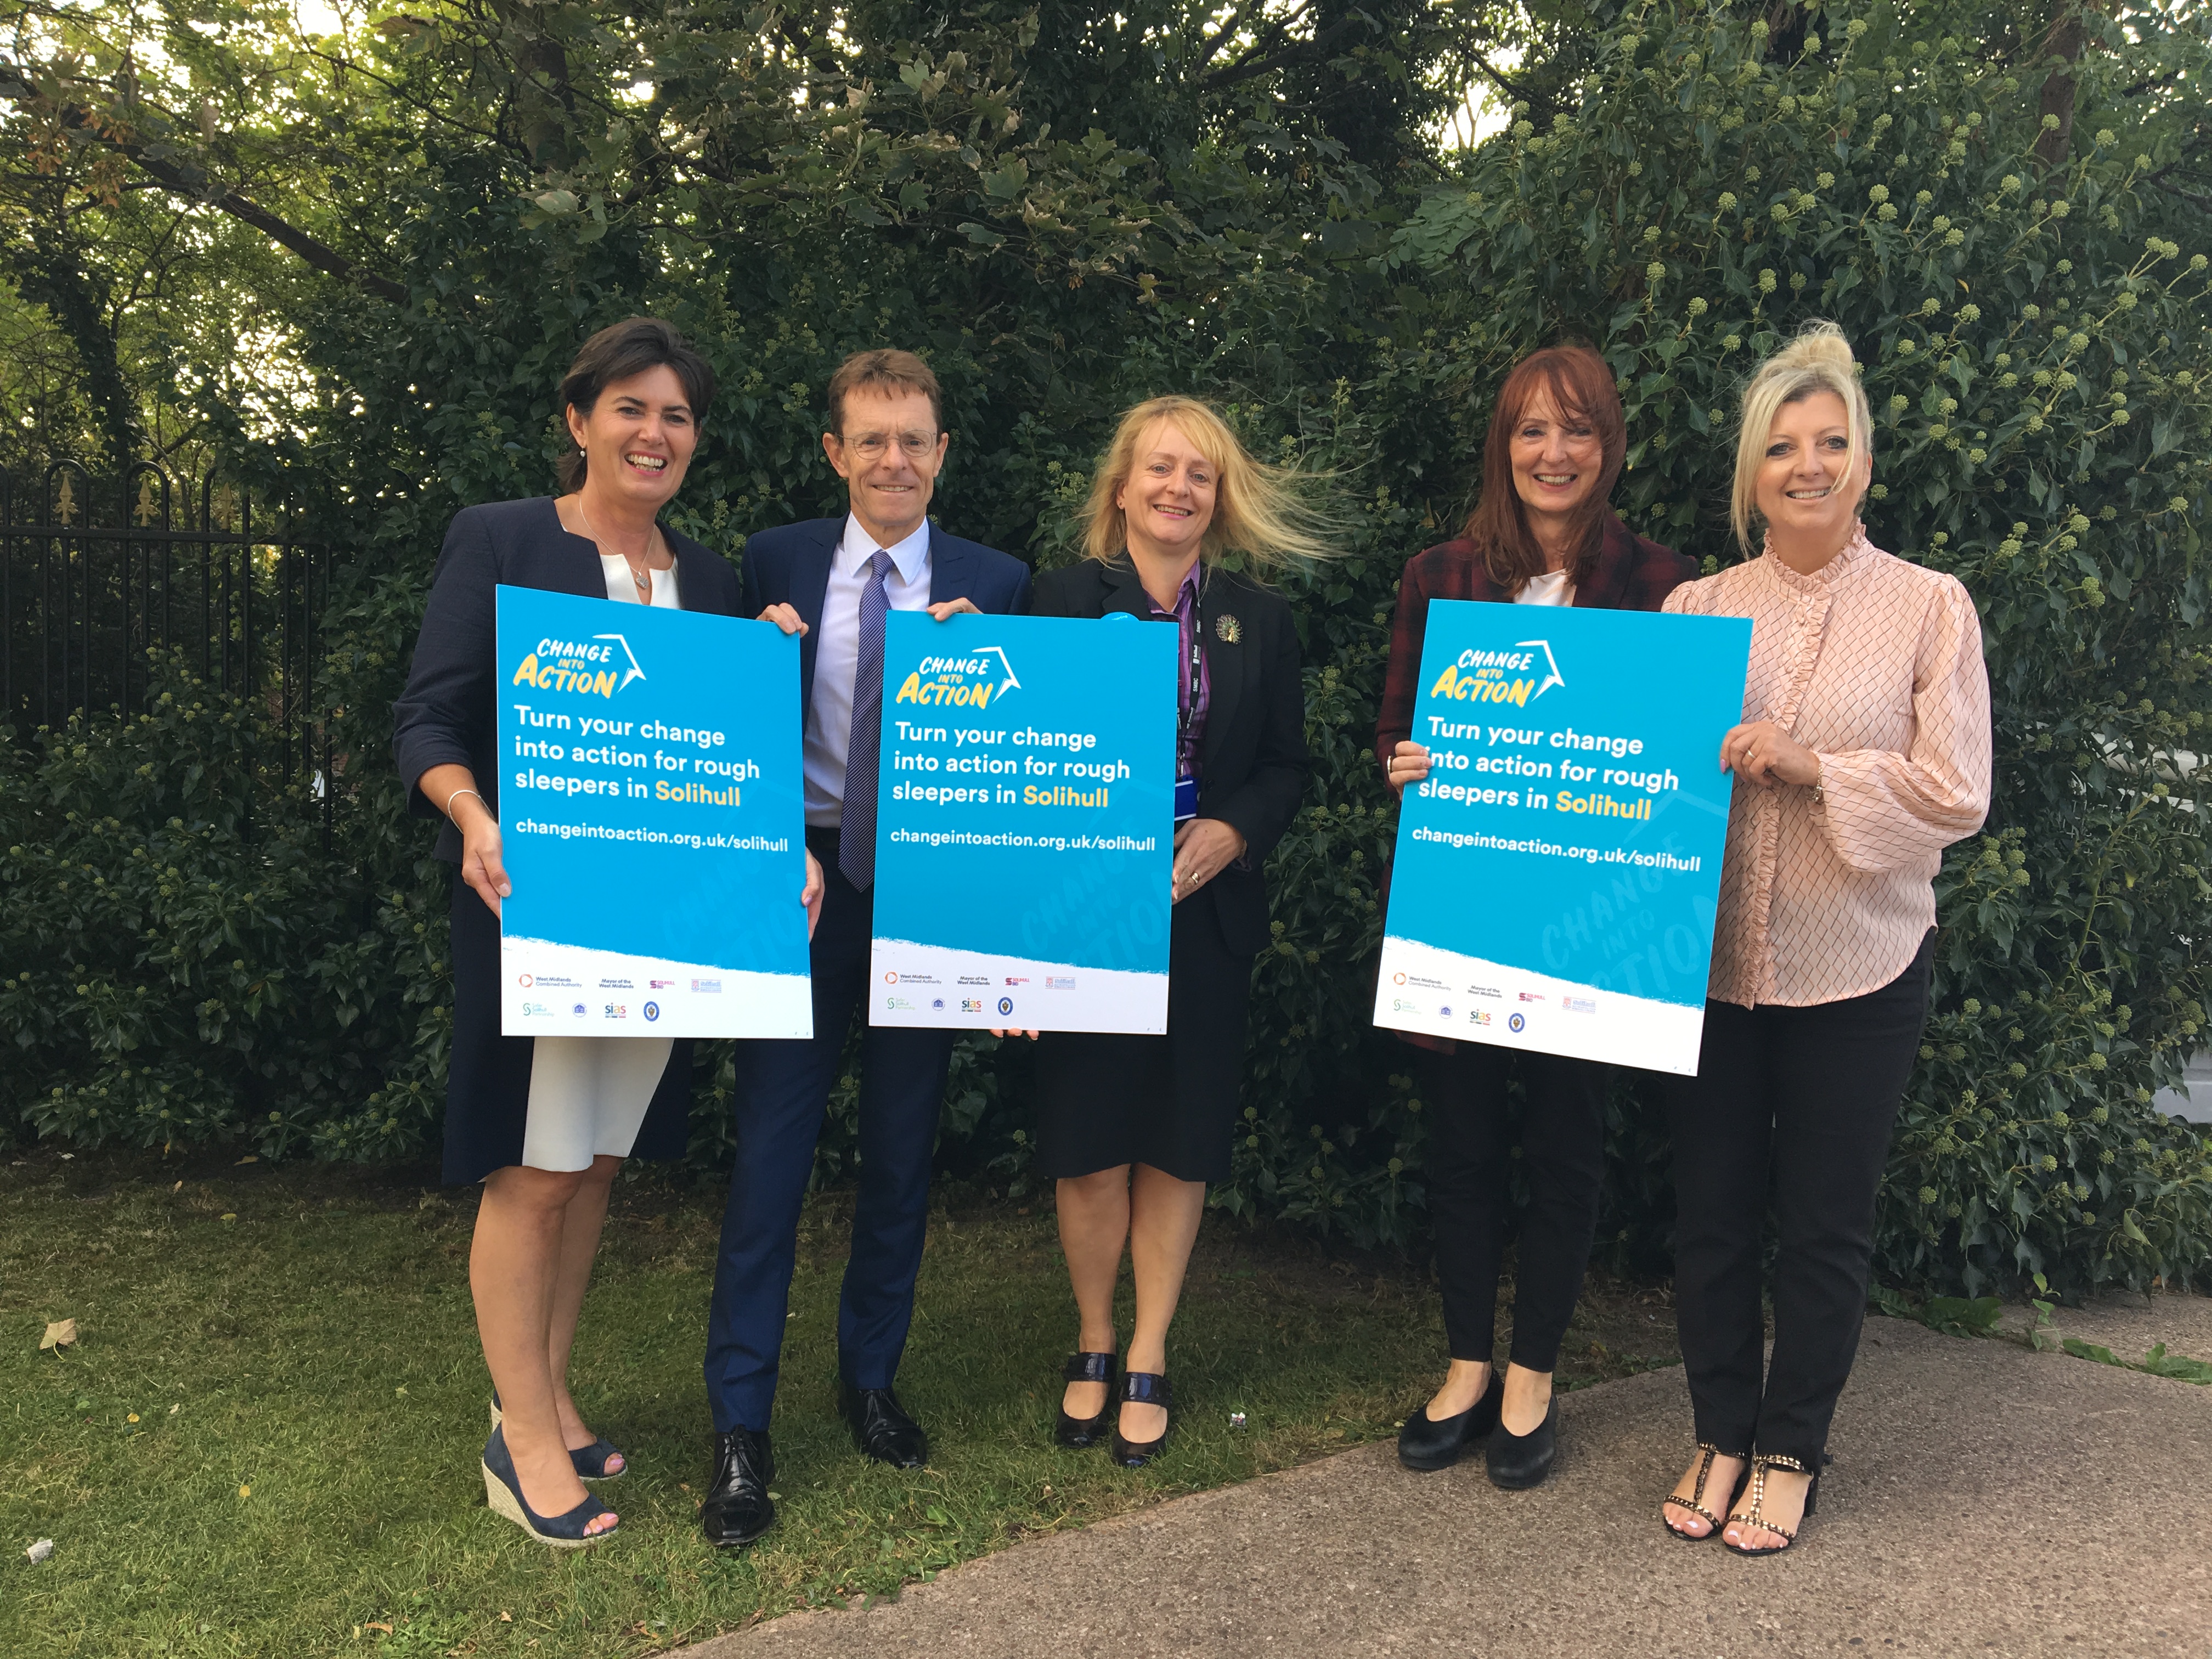 left to right, Cllr Karen Grinsell, Mayor of the West Midlands - Andy Street, Cllr Alison Rolf, Chair of the WMCA homelessness Task Force - Jean Templeton and Chief Executive of Solihull BID - Melanie Palmer at the launch of Solihull Change into Action on 12 September 2019.